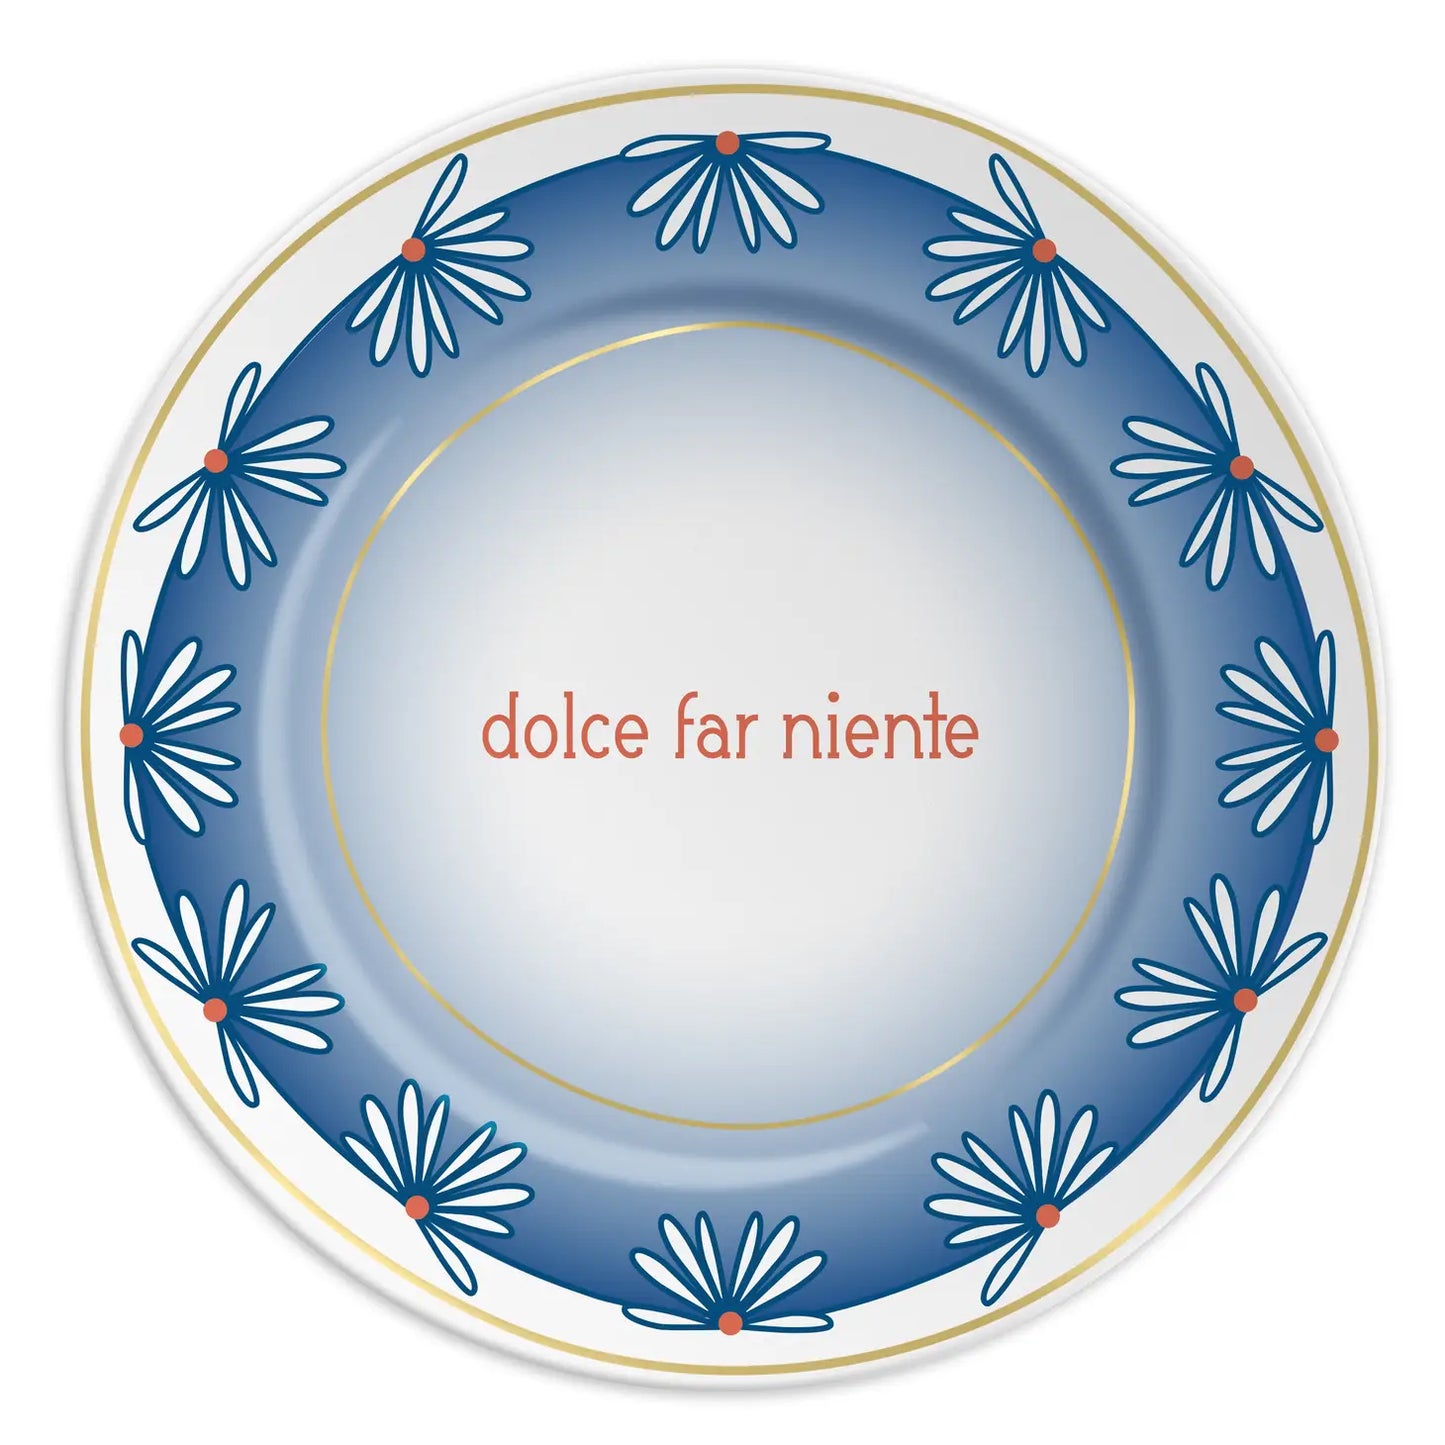 Dolce Far Niente Large Porcelain Plate - Curated Home Decor